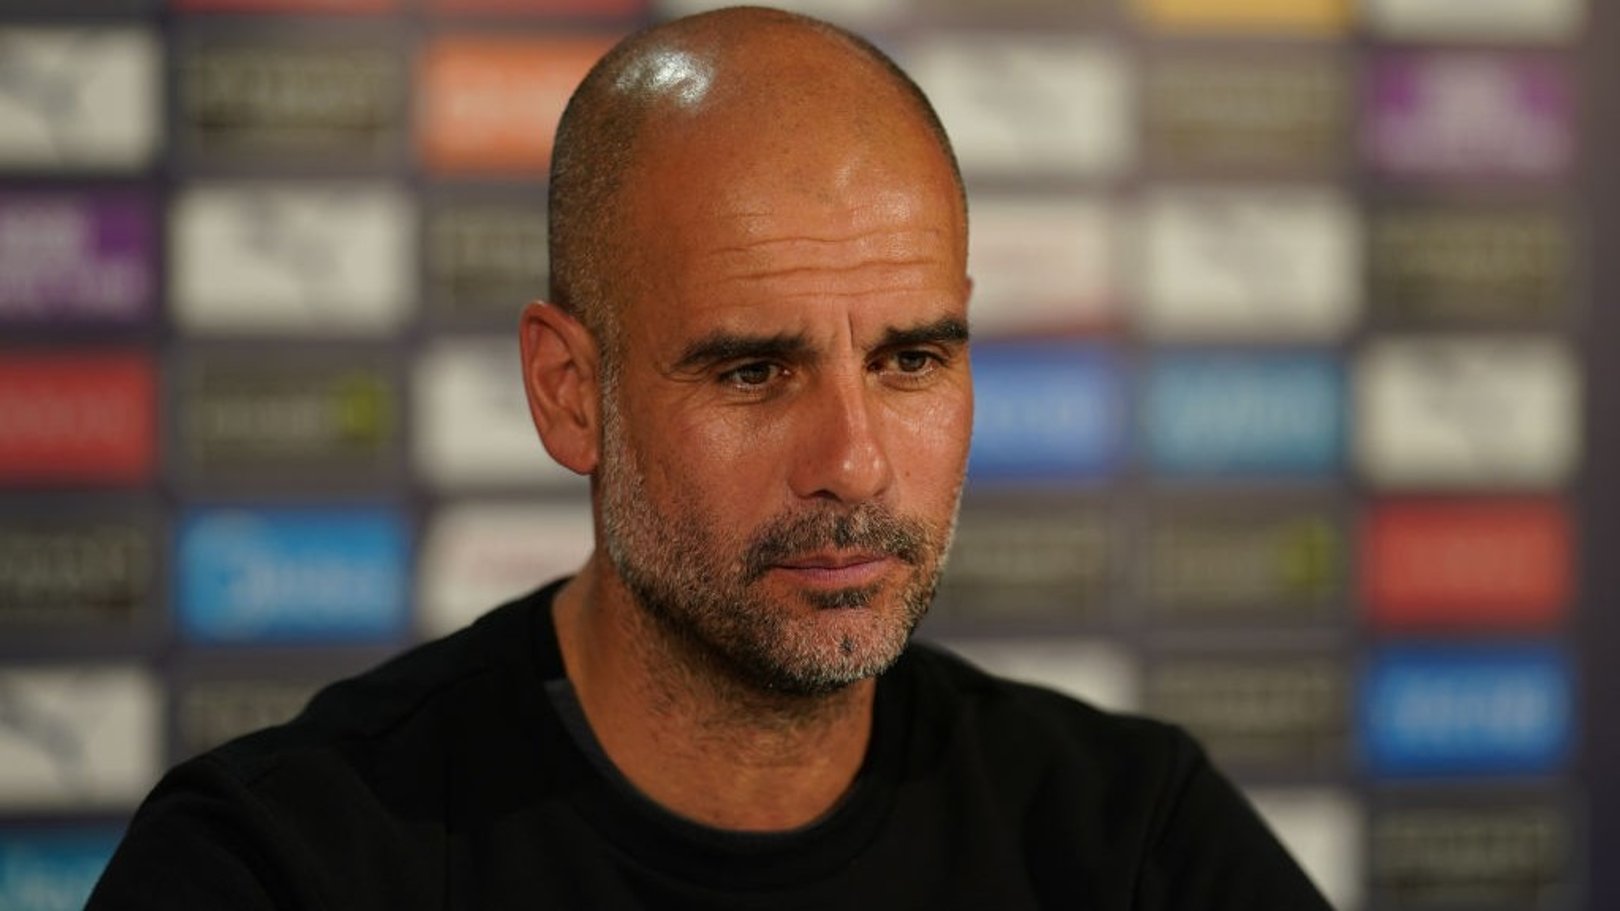 'Enjoy the pressure': Guardiola's message to players ahead of PSG